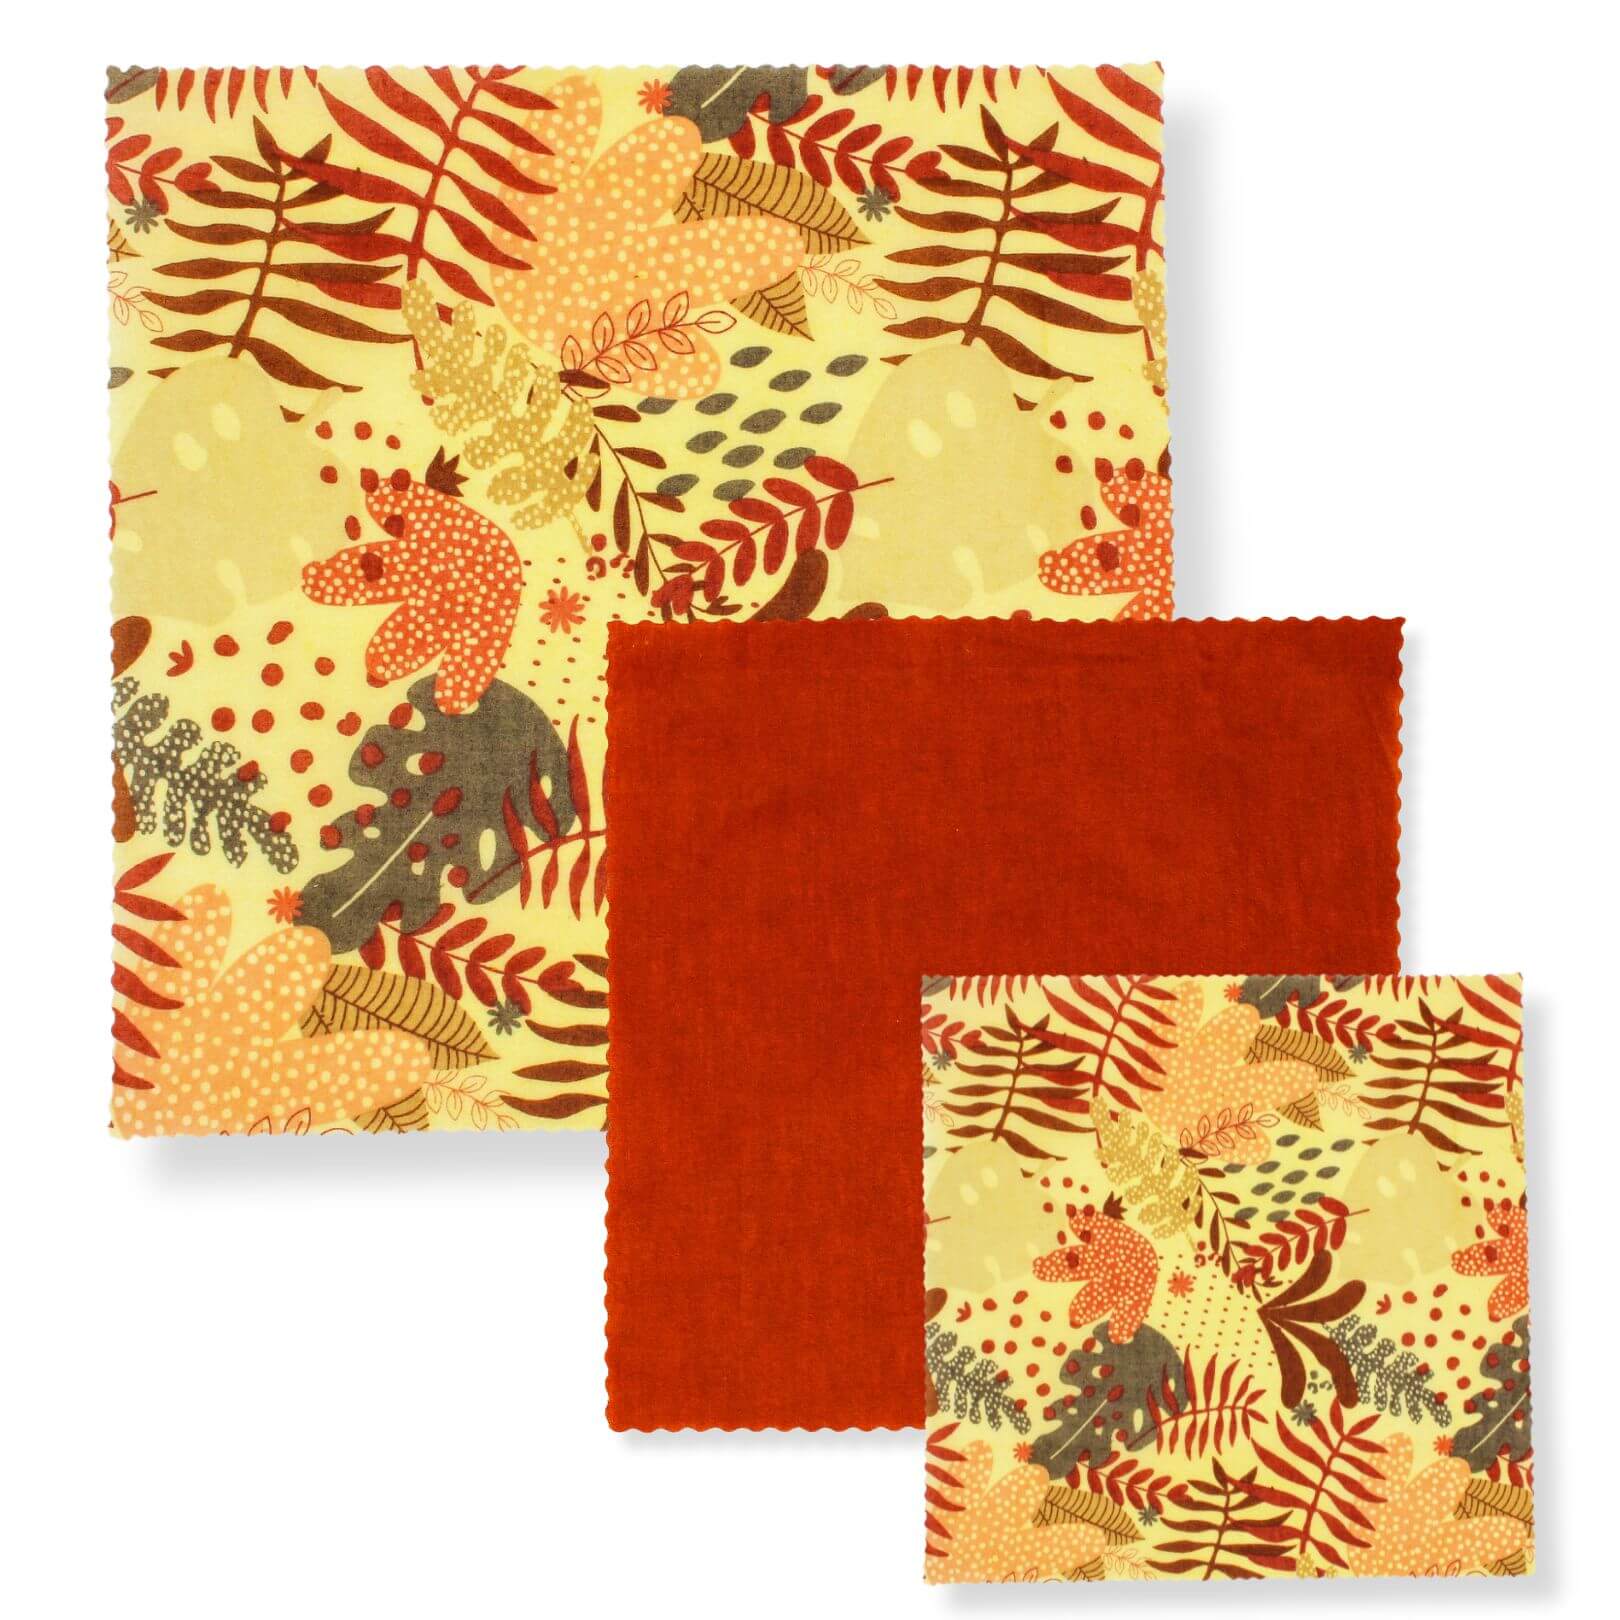 Beeswax Food Wraps - Variety Set - The Plastic Free Co.